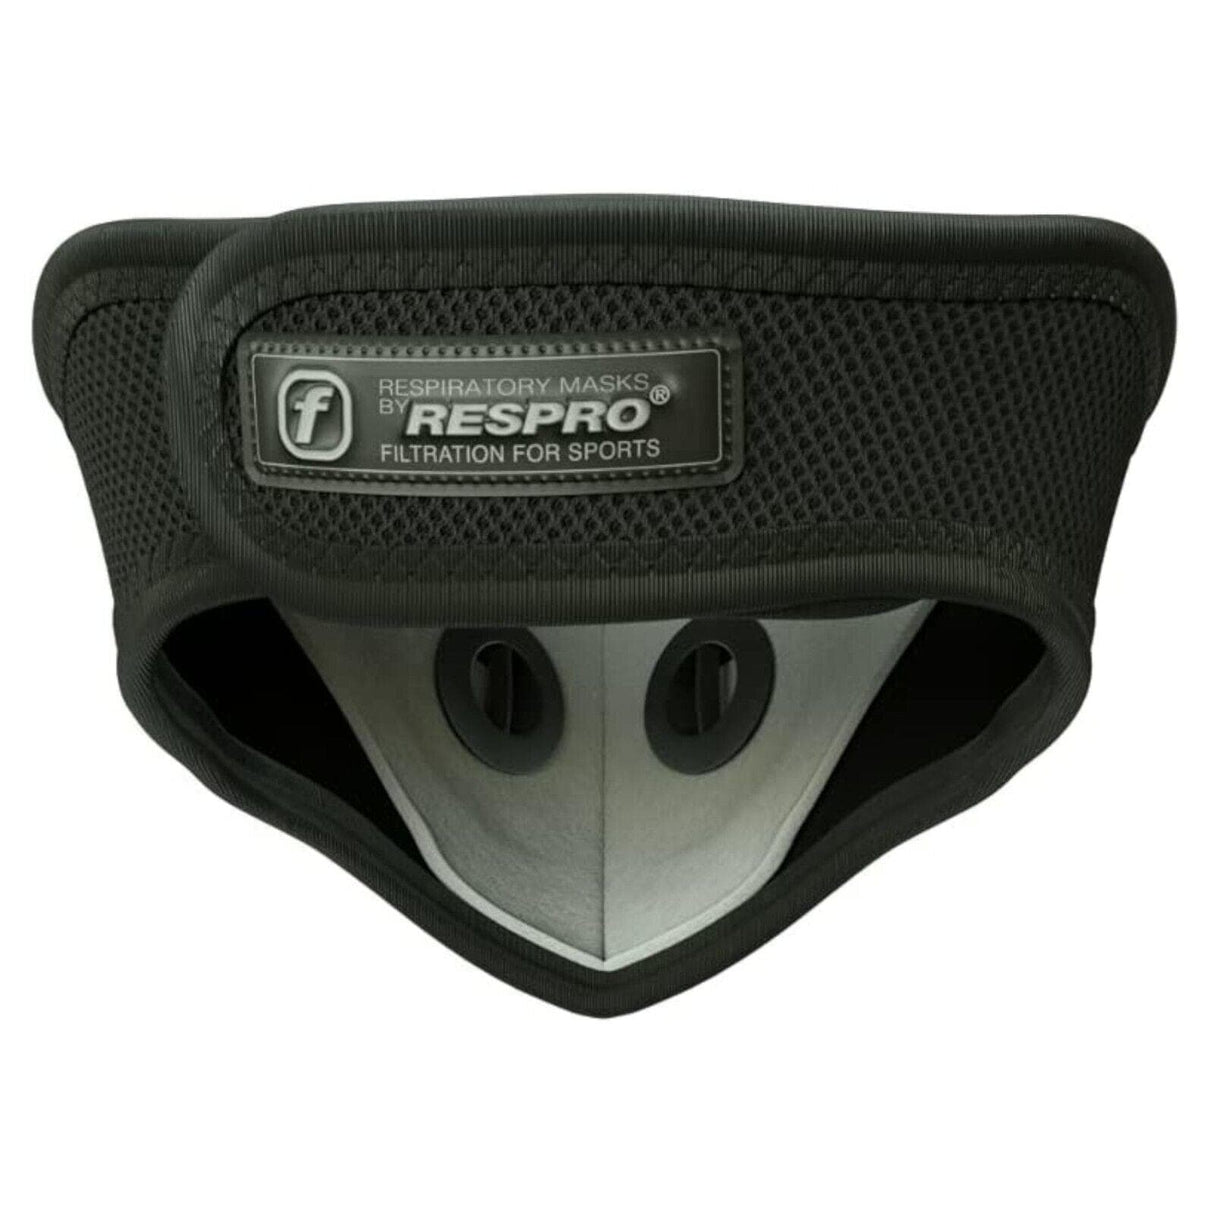 Respro Ultralight Mask with Powa Filter Valves - Black - Small